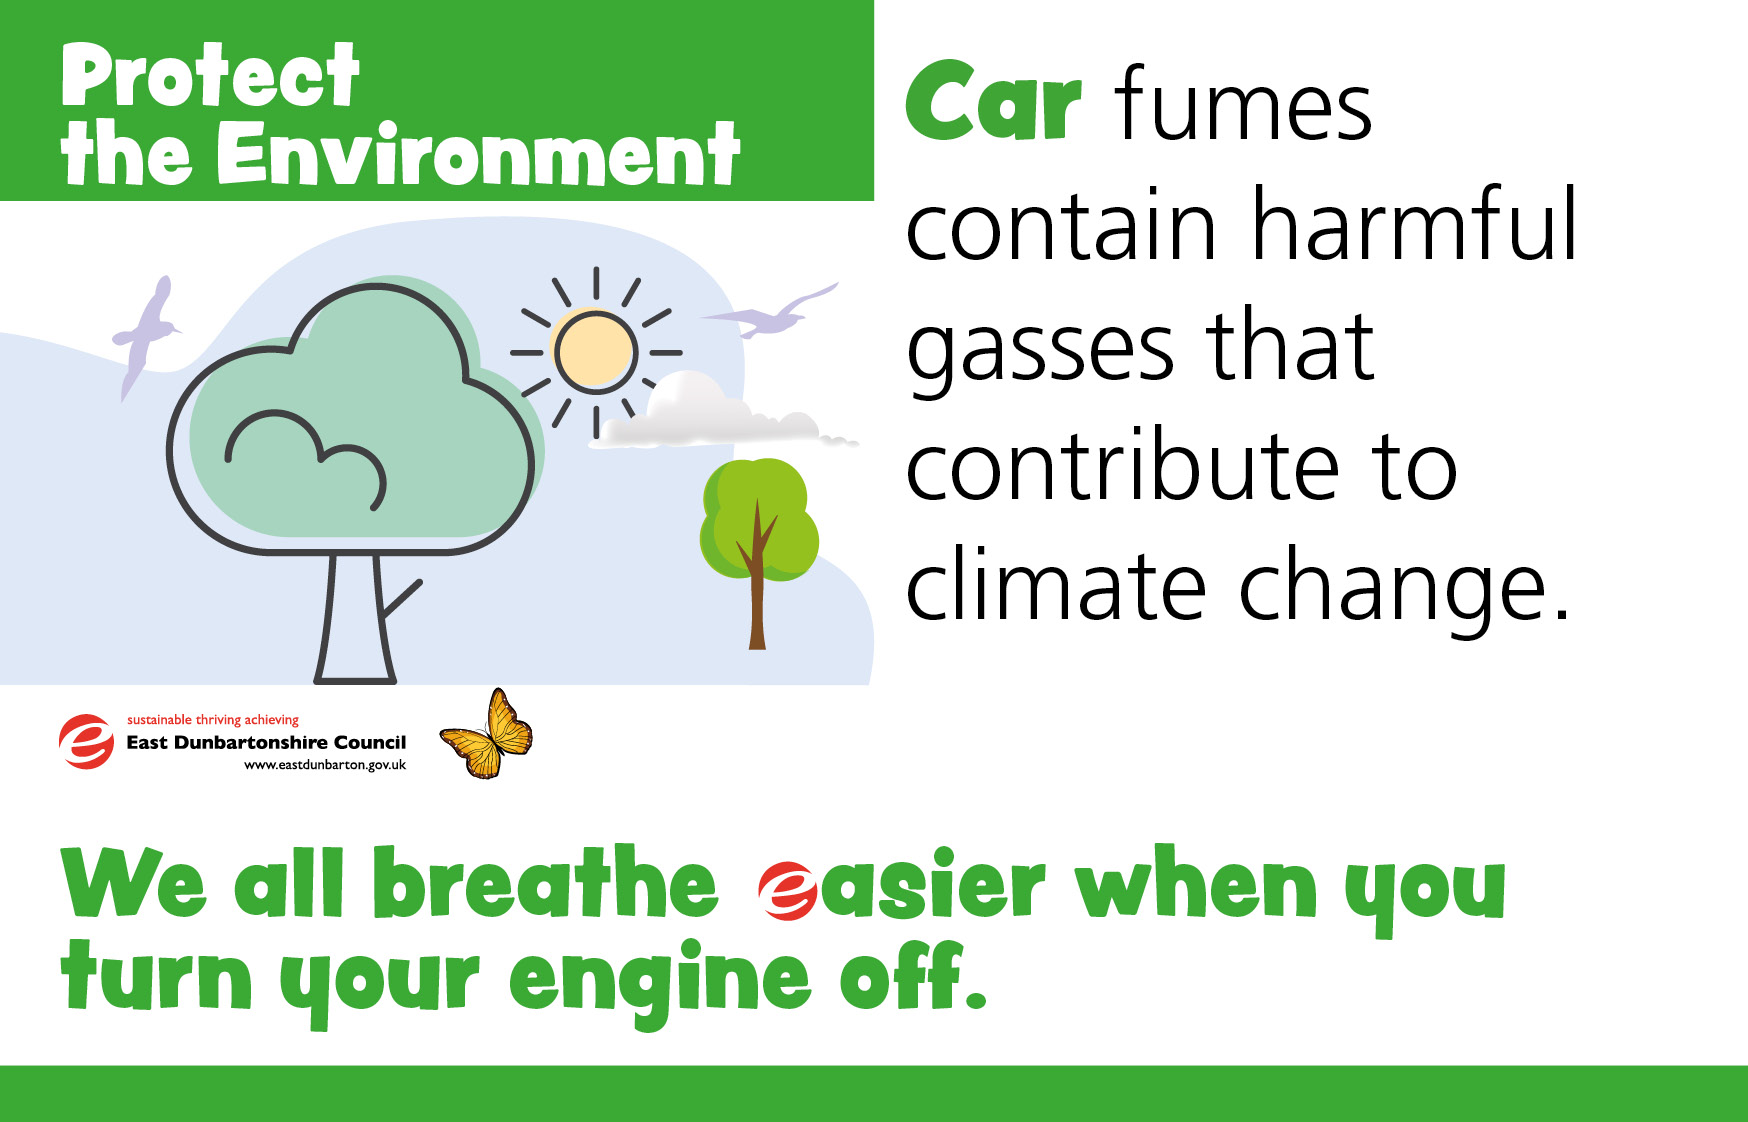 Protect the Environment – Car fumes contain harmful gasses that contribute to climate change.  We all breathe easier when you turn your engine off.